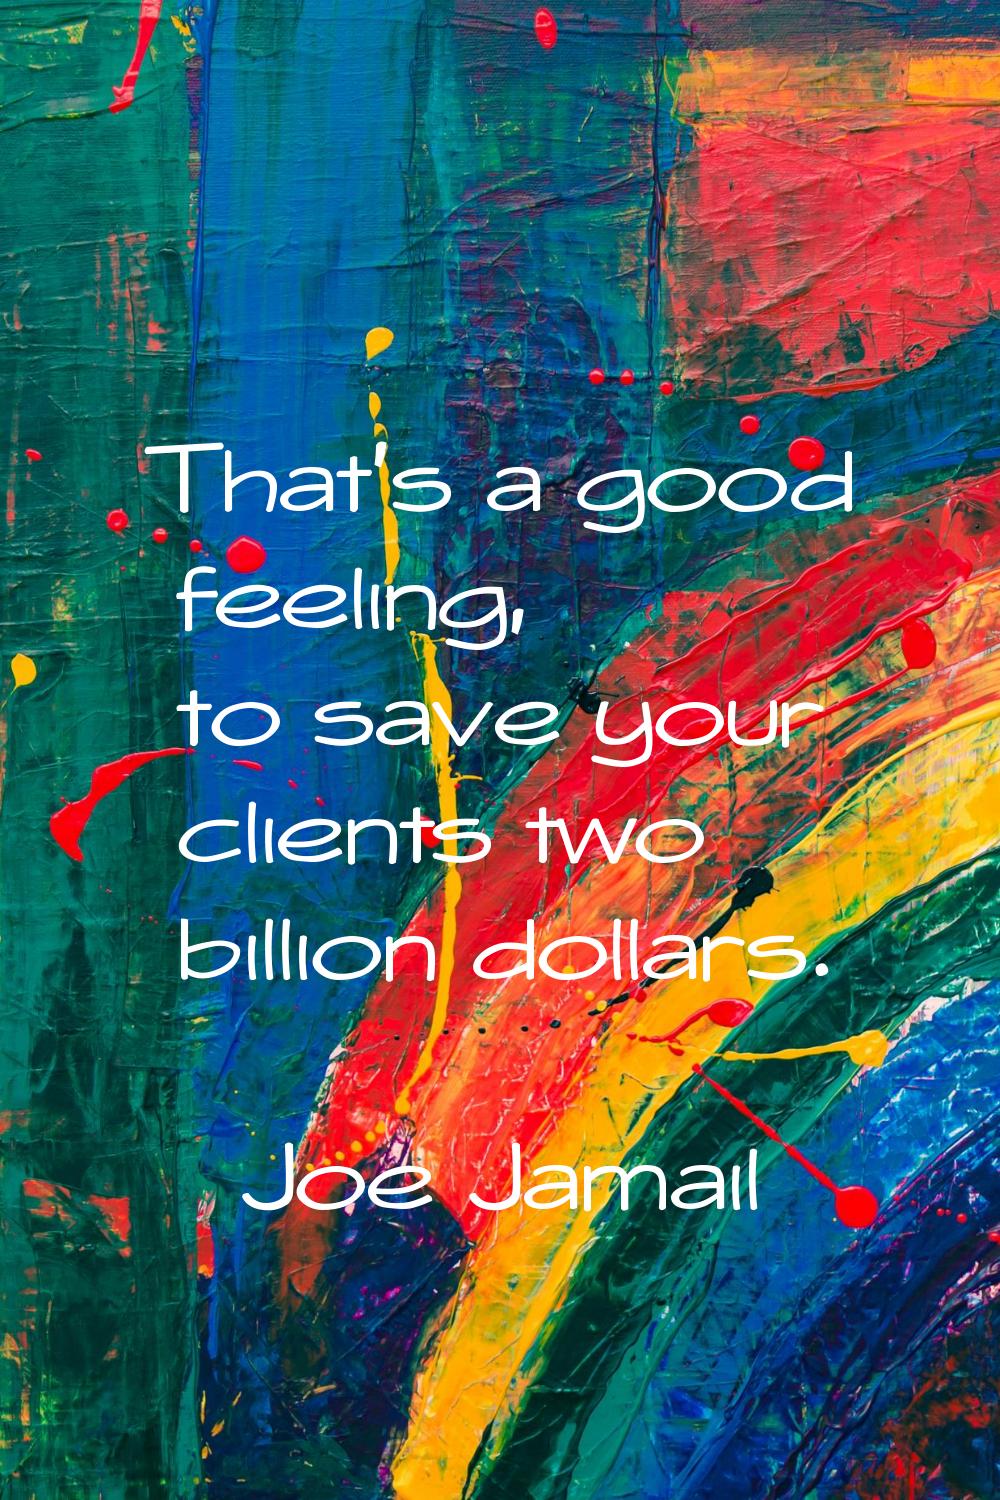 That's a good feeling, to save your clients two billion dollars.